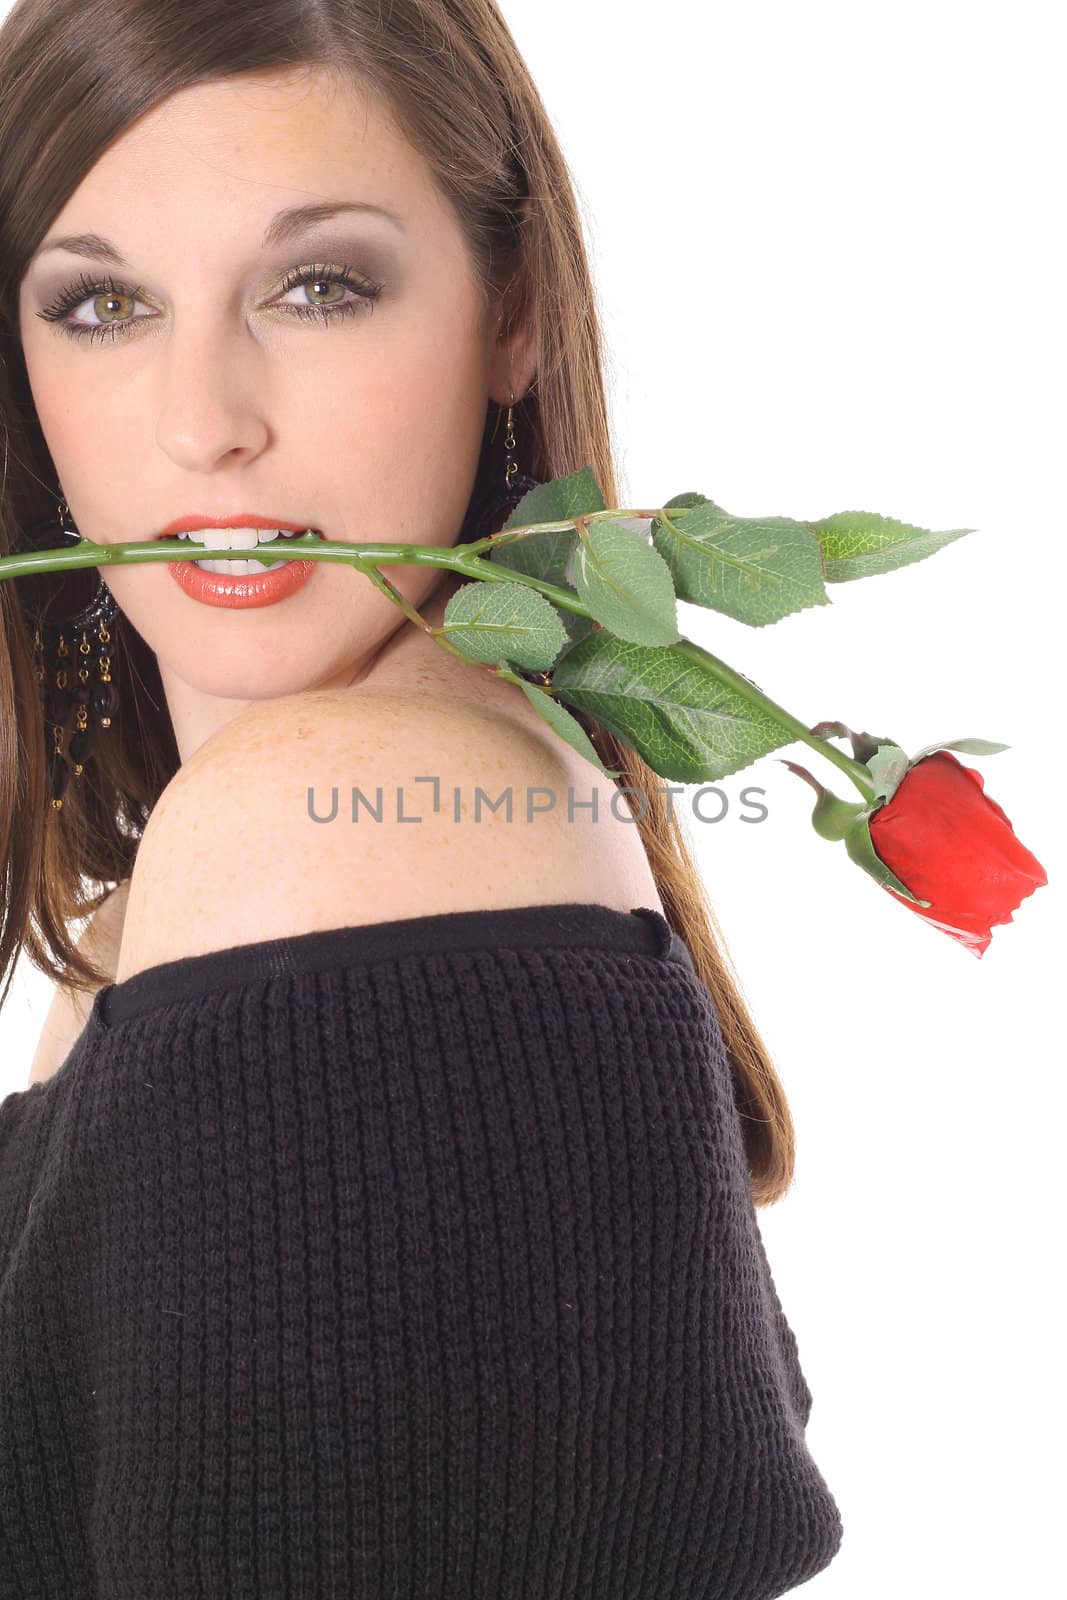 sassy brunette with a rose